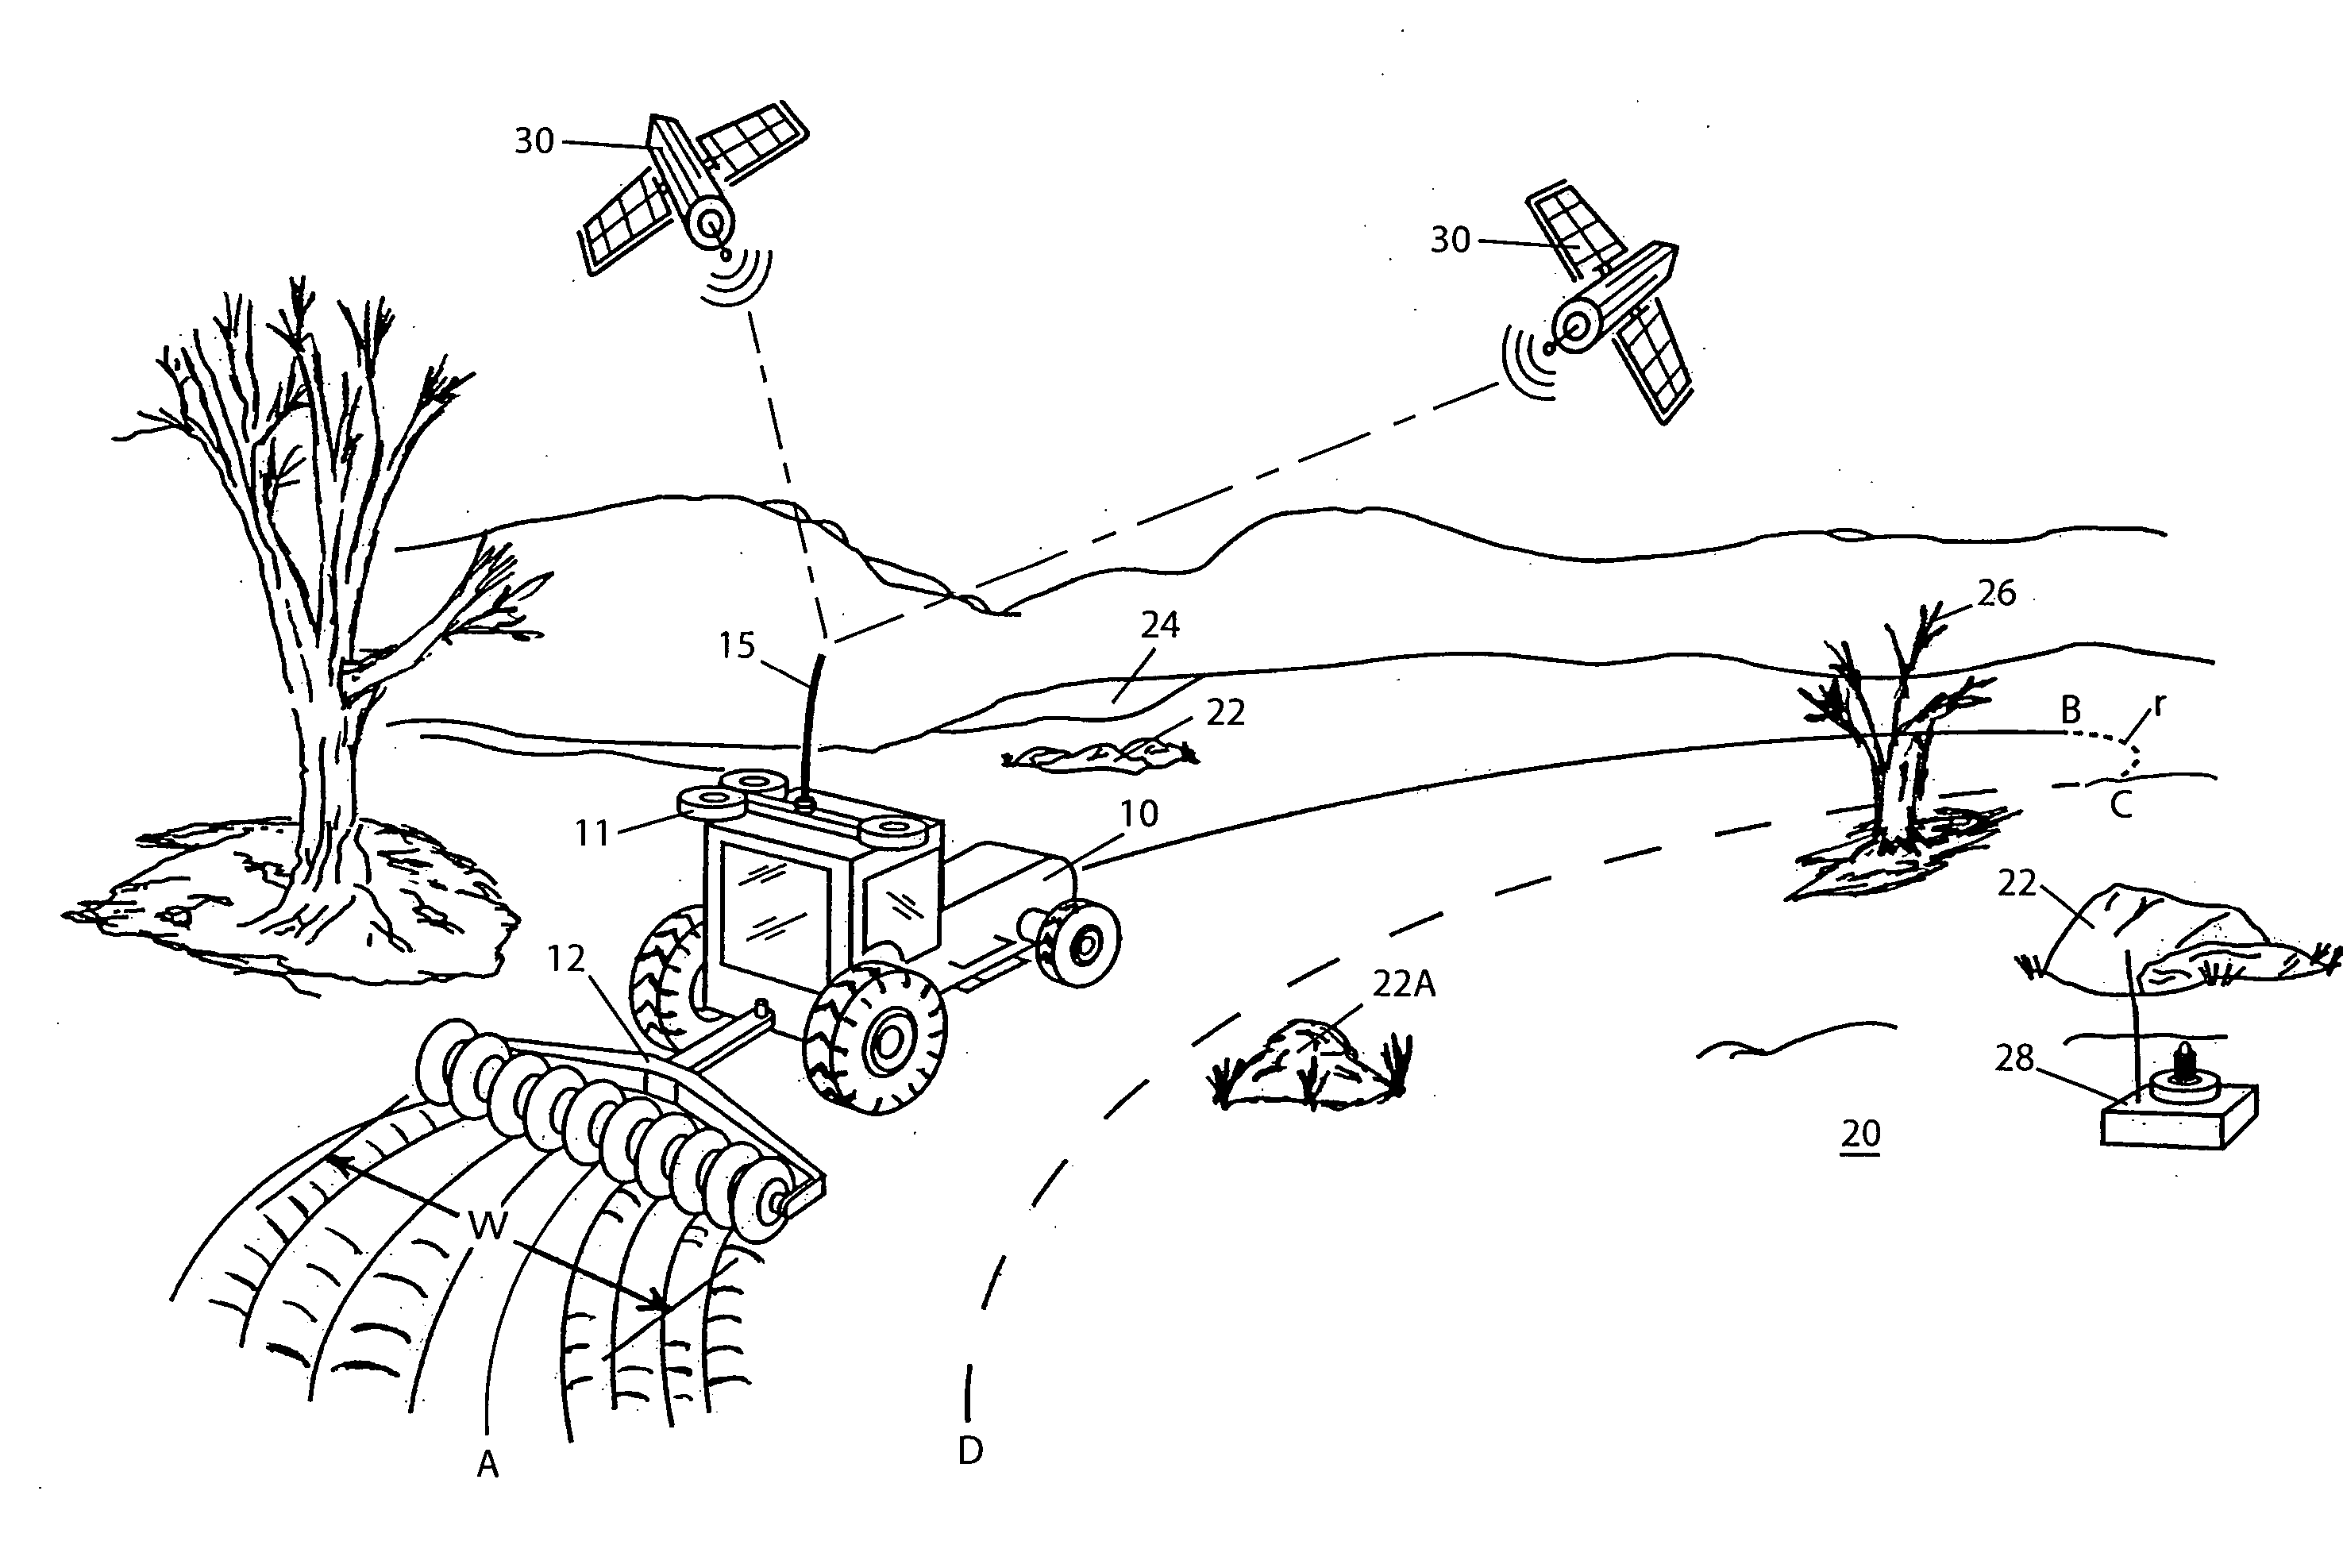 System and method for interactive selection of agricultural vehicle guide paths with varying curvature along their length